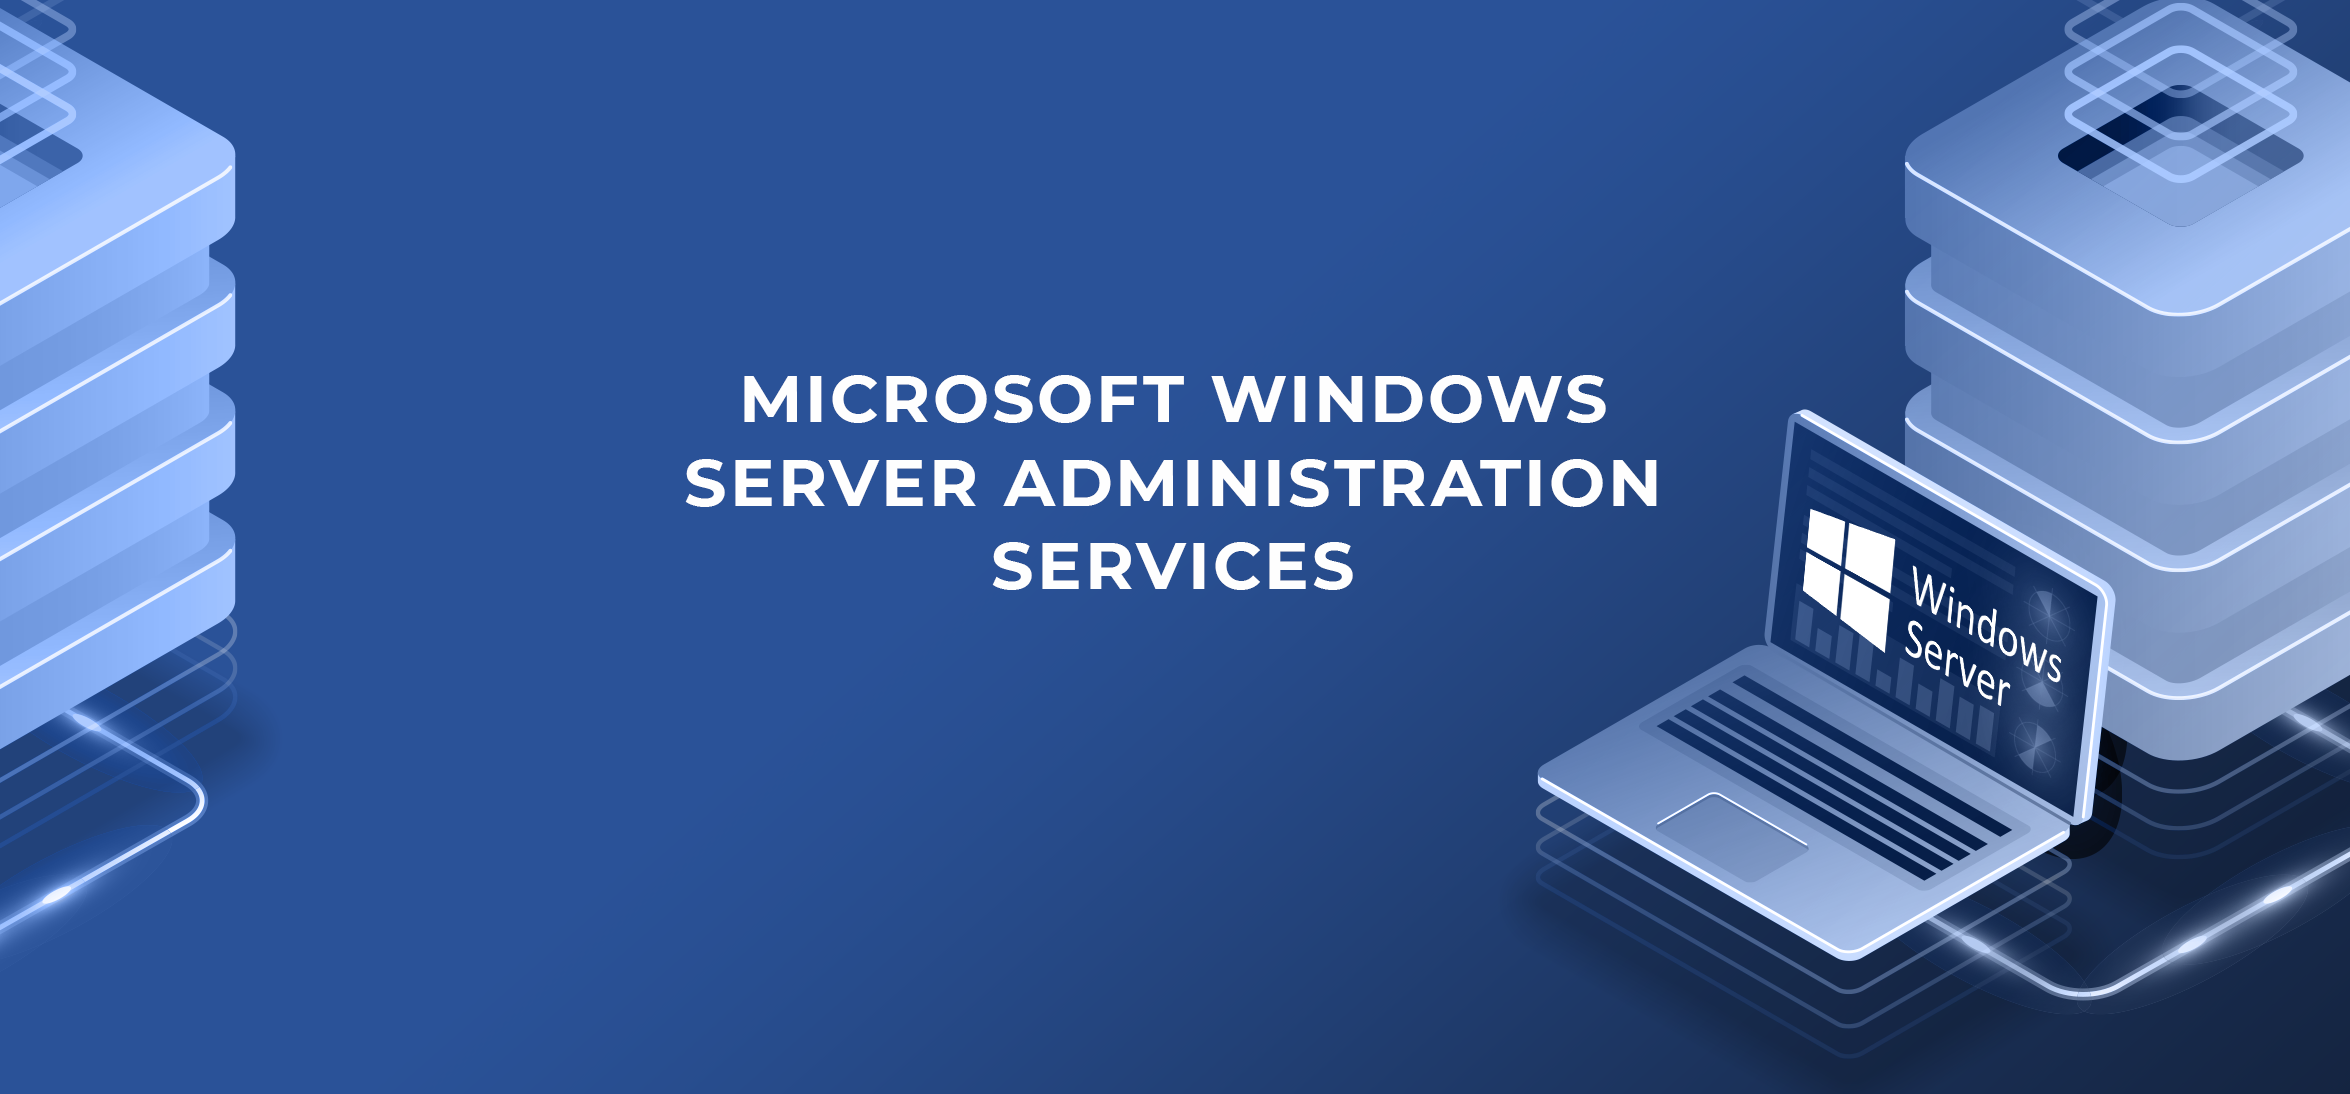 Effective Windows Server Administration and Support Solution Provider in Lakewood NJ, 08701